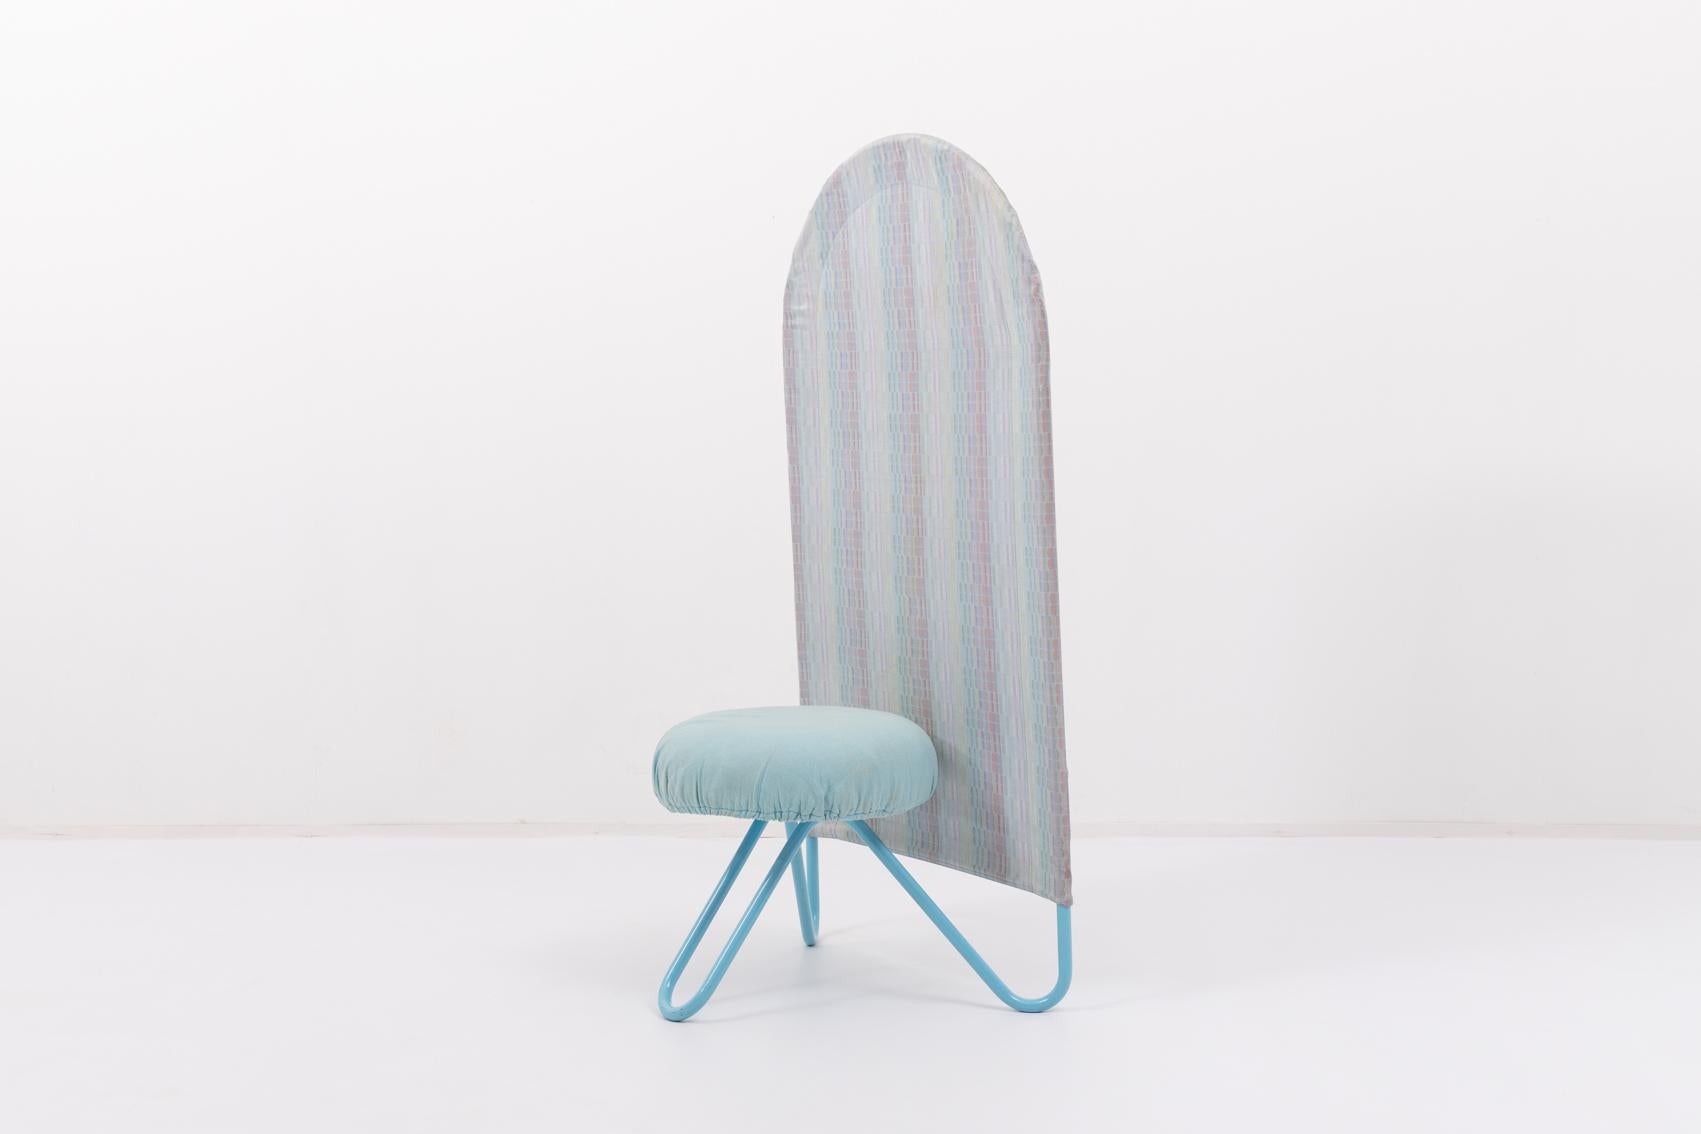 Very rare high back chair produced by Bonaldo in 1980’s. It features light blue coated tubular steel frame with removable fabric cover dressed on the backrest. It also has a removable fabric seat cover.

Condition
Good, age related wear and